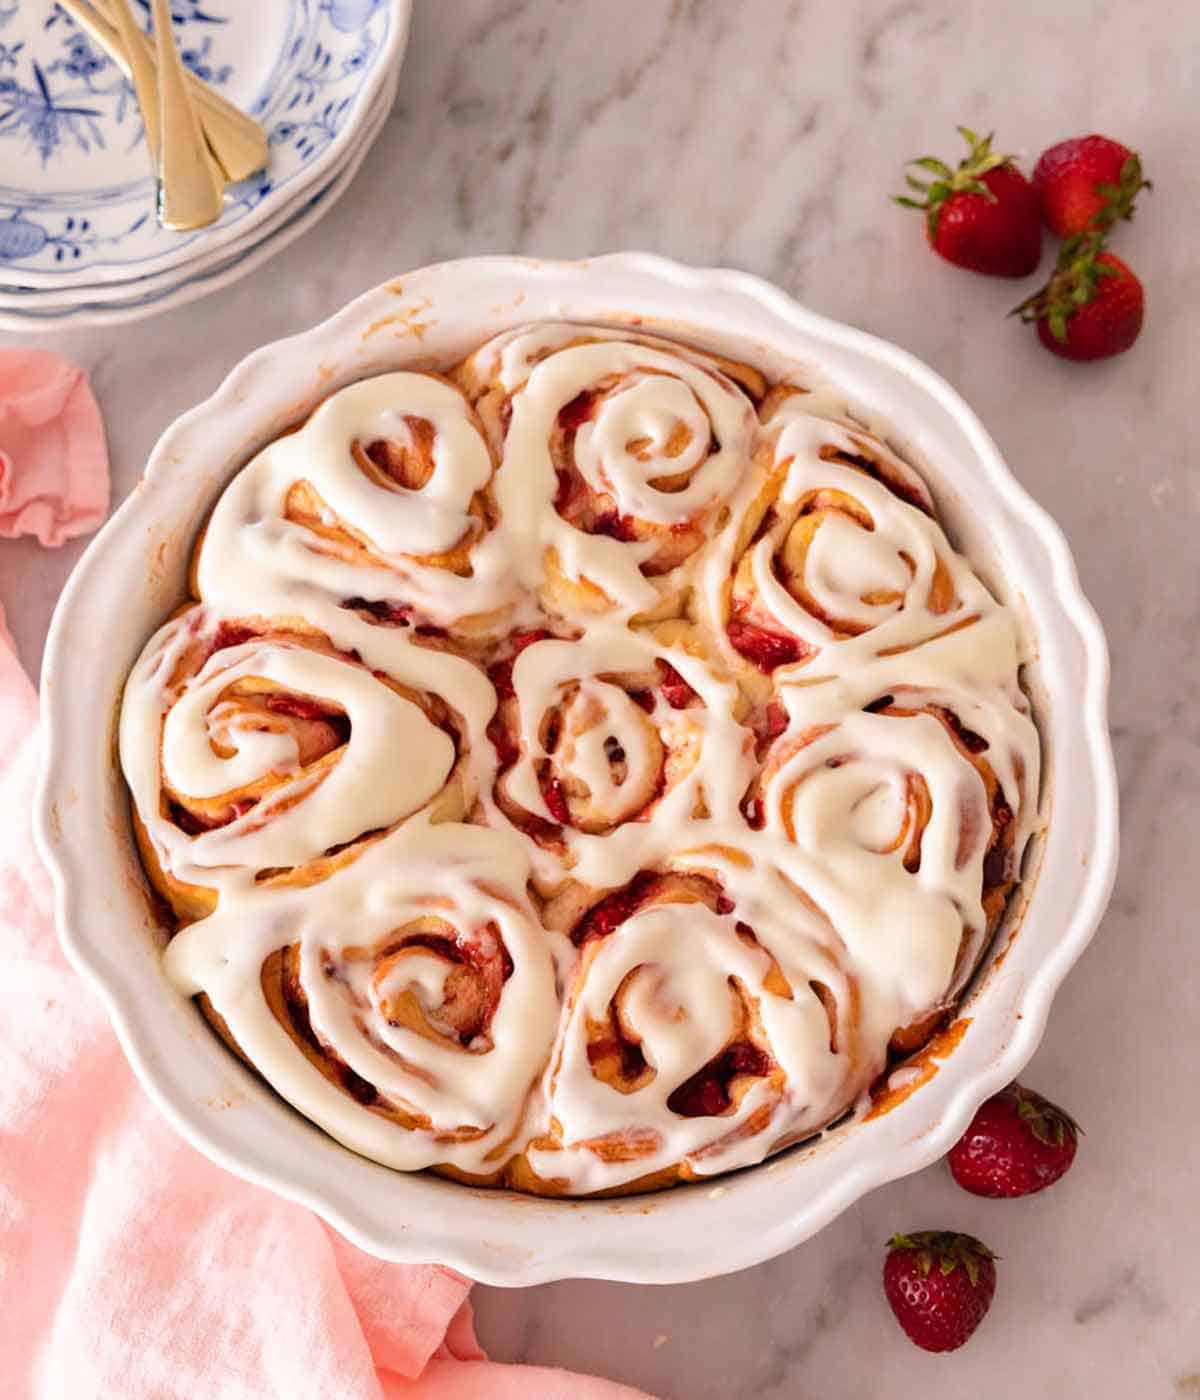 Overhead view of a round baking dish with strawberry rolls with fresh strawberries scattered around.